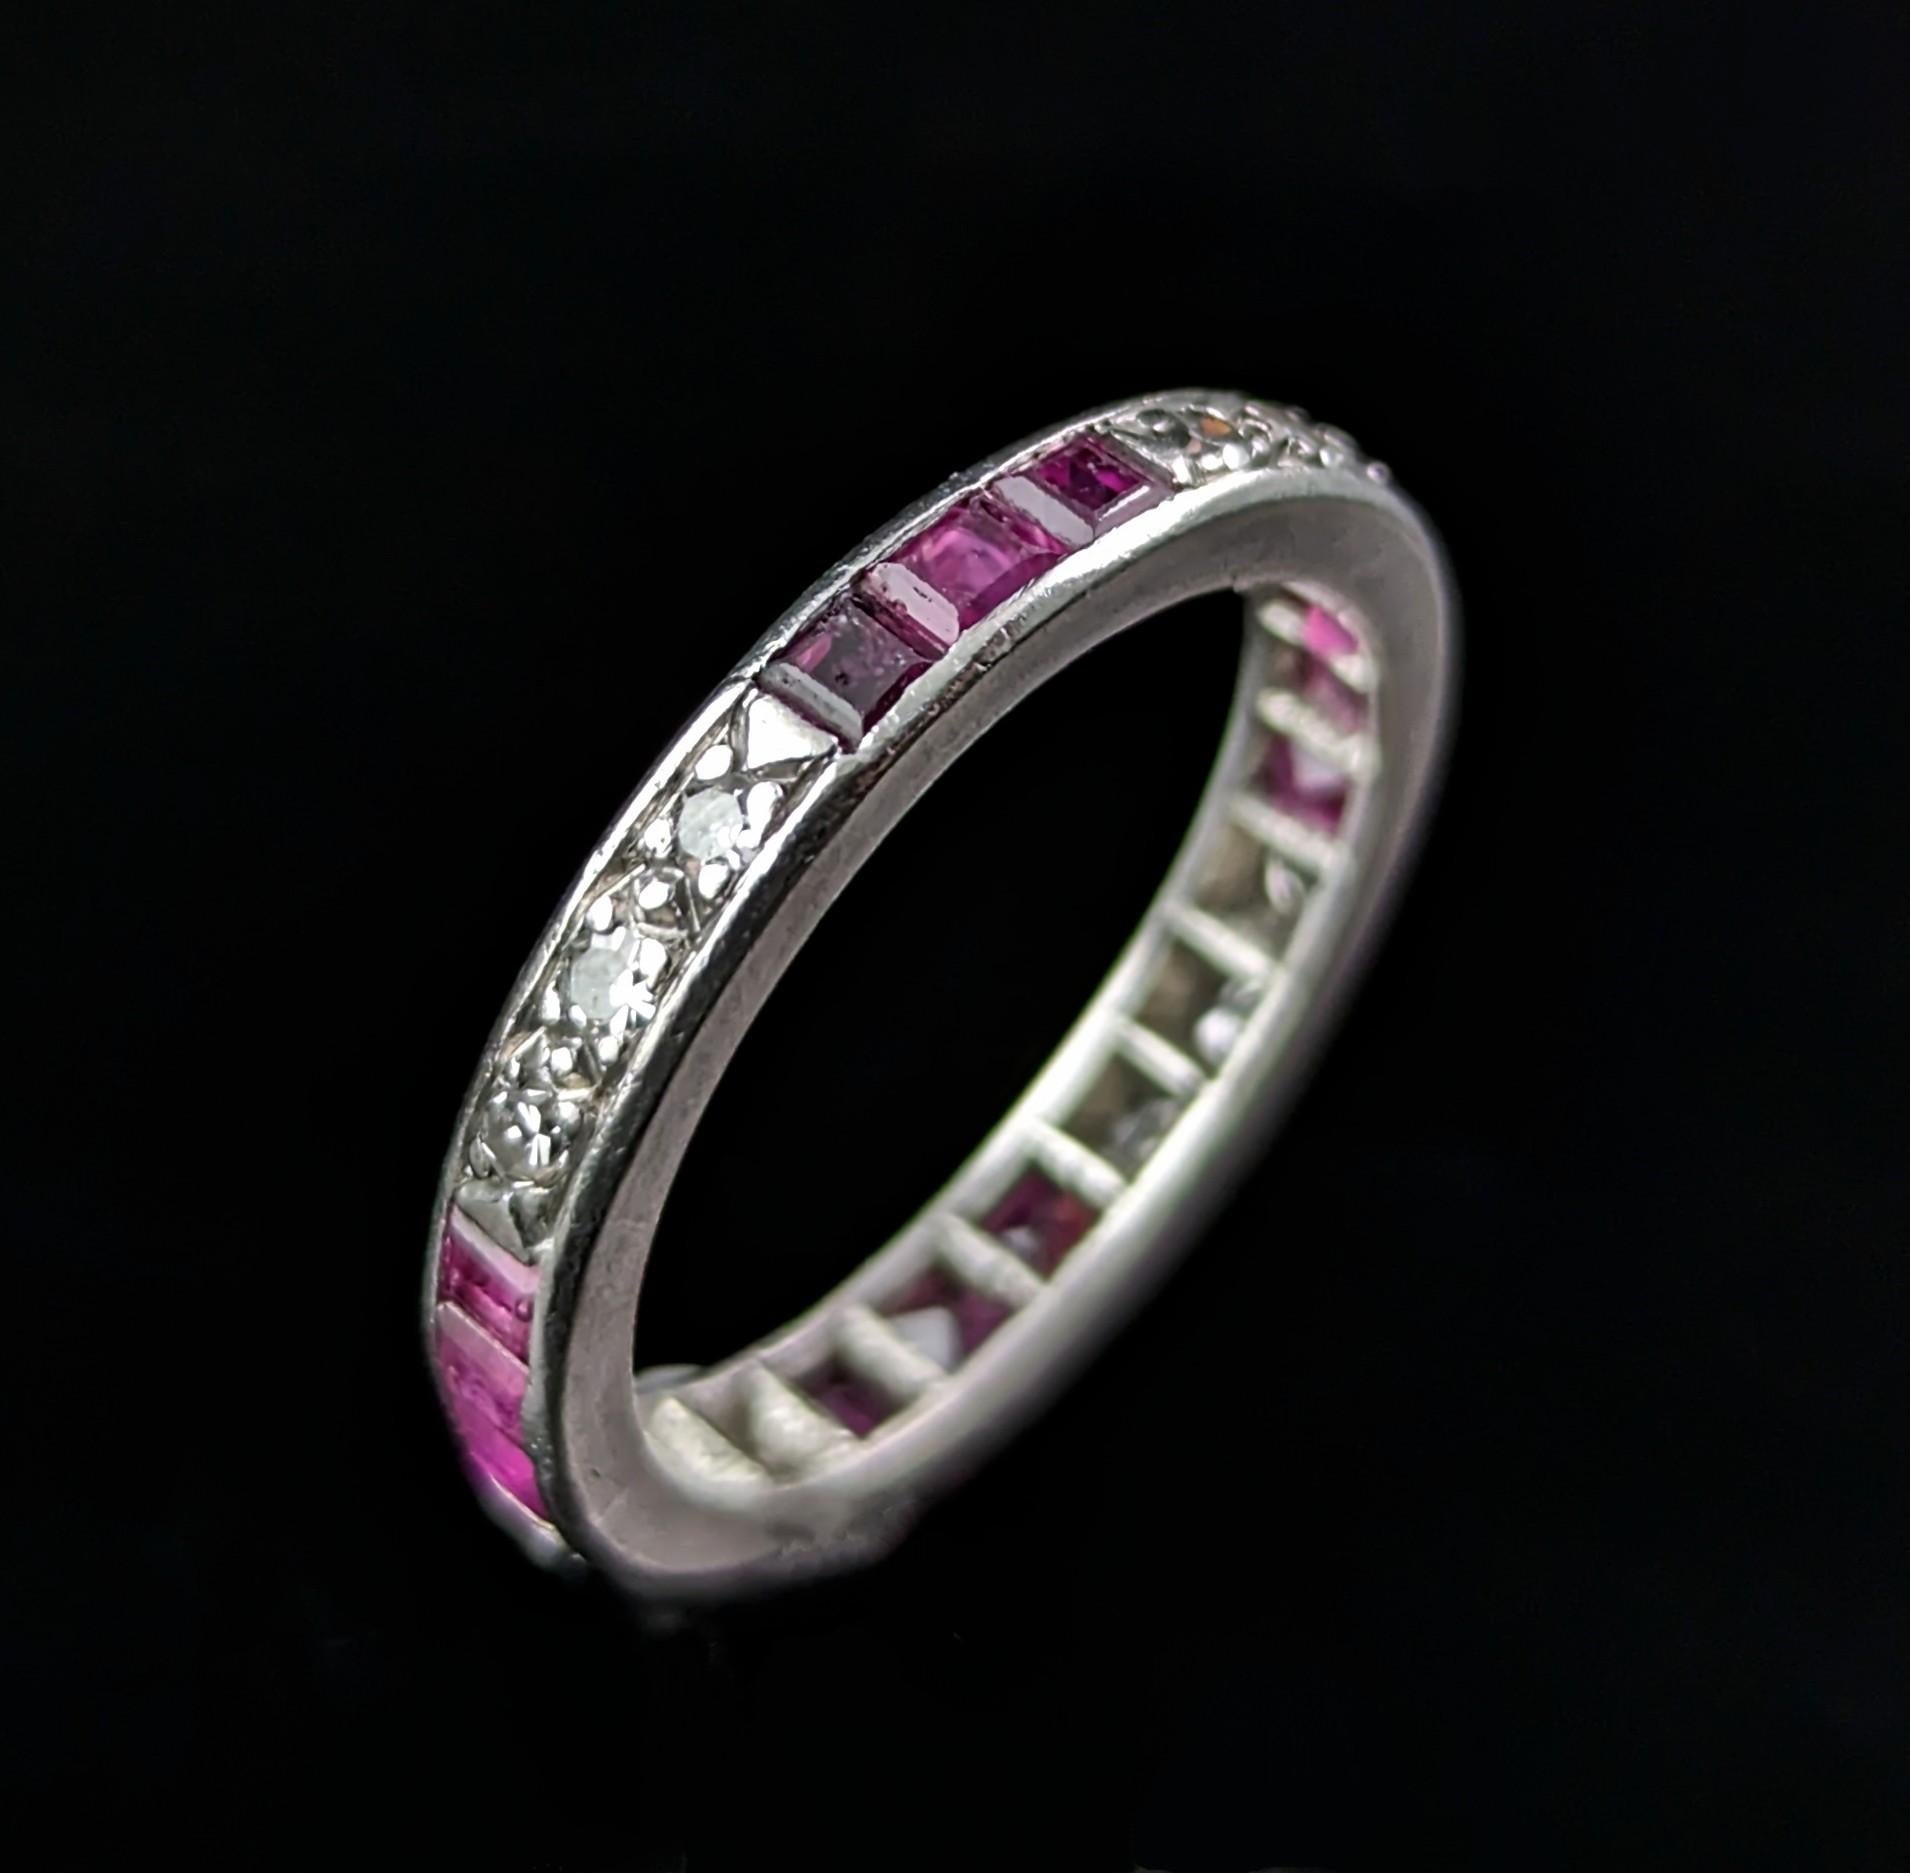 The decadence and timeless beauty of Art Deco eternity rings such as this Ruby and Diamond ring is unbeatable.

It is a style that has embodied the sentiment of love and connection for centuries with some suggesting there origins go back to ancient